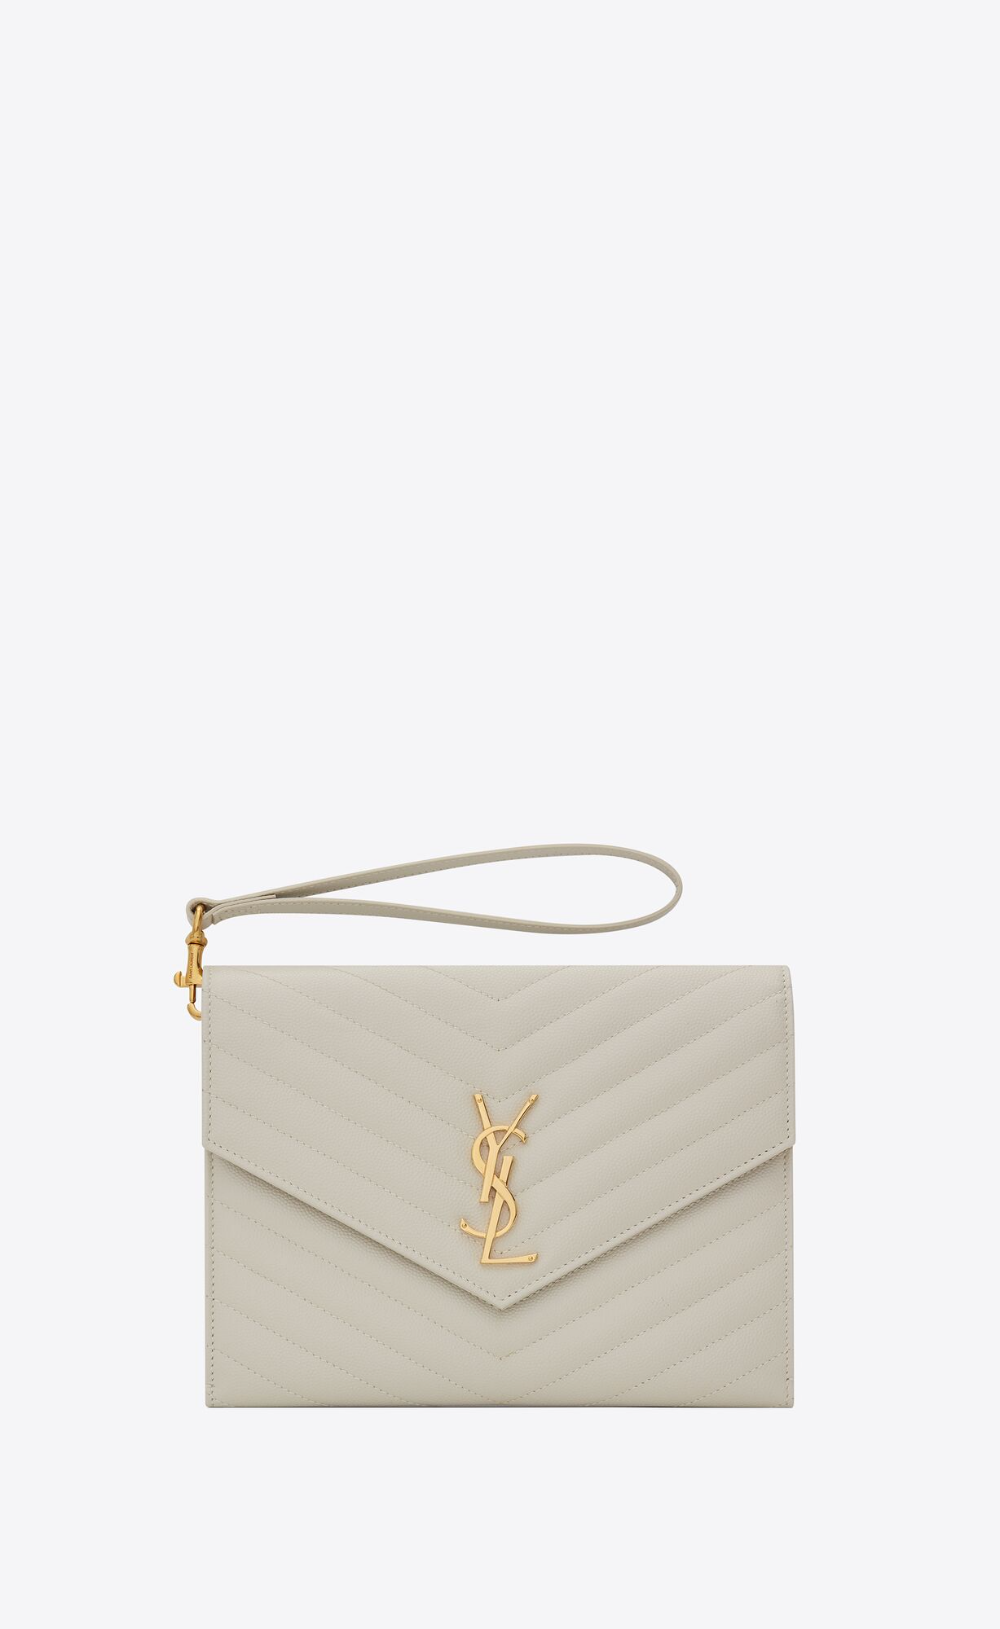 https://flyfiercefab.com/wp-content/uploads/2022/04/YSL-White-and-Gold-Monogram-Clutch.png